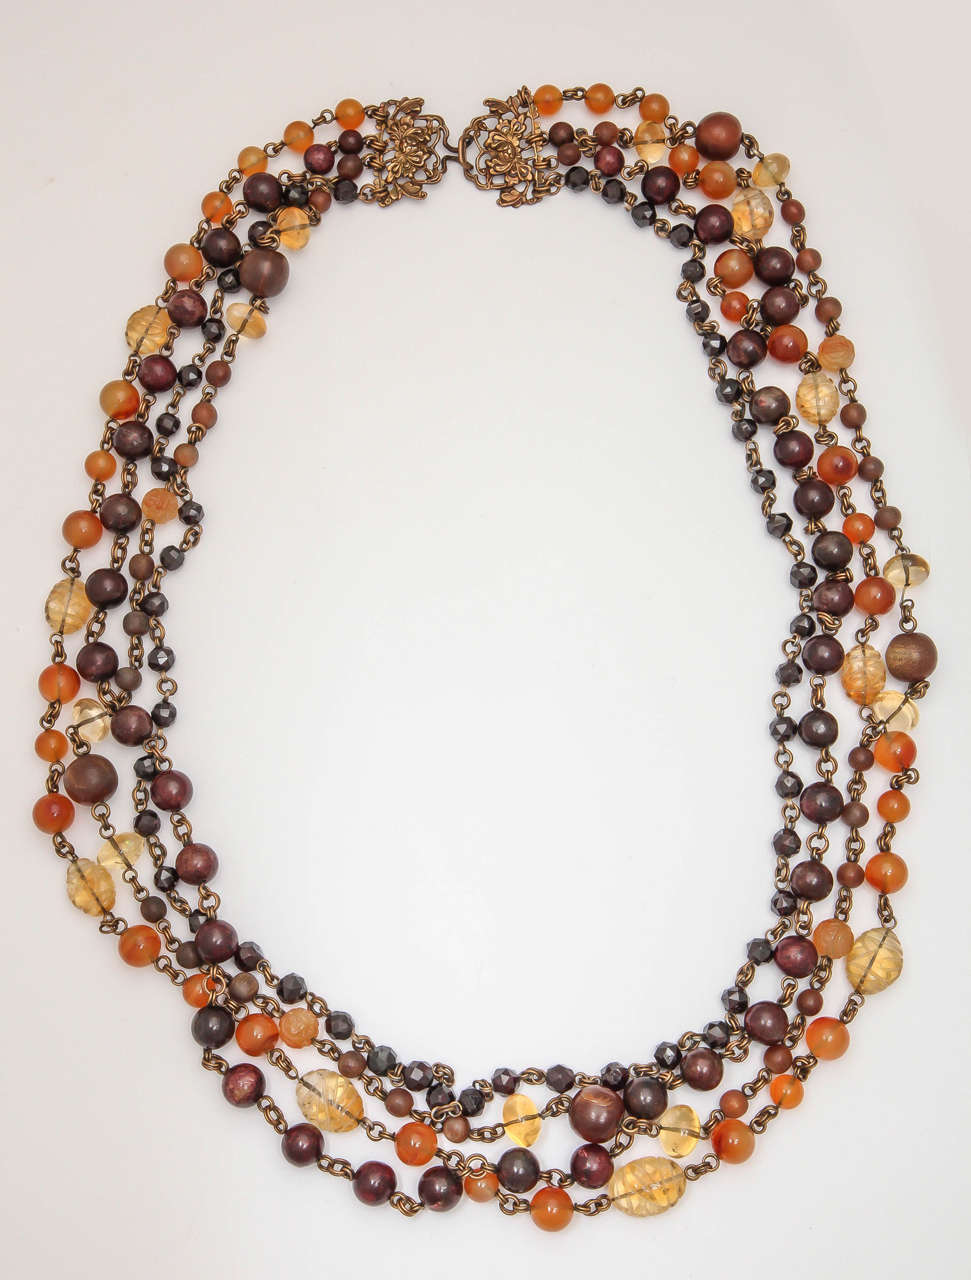 Way ahead of his time & back in style again. Four graduated strands of stone beads connected by brass links hanging from a signature  Clasp.  Combination of agate beads, carved carnelian and carved Citrine, Polished orb beads, as well as faceted